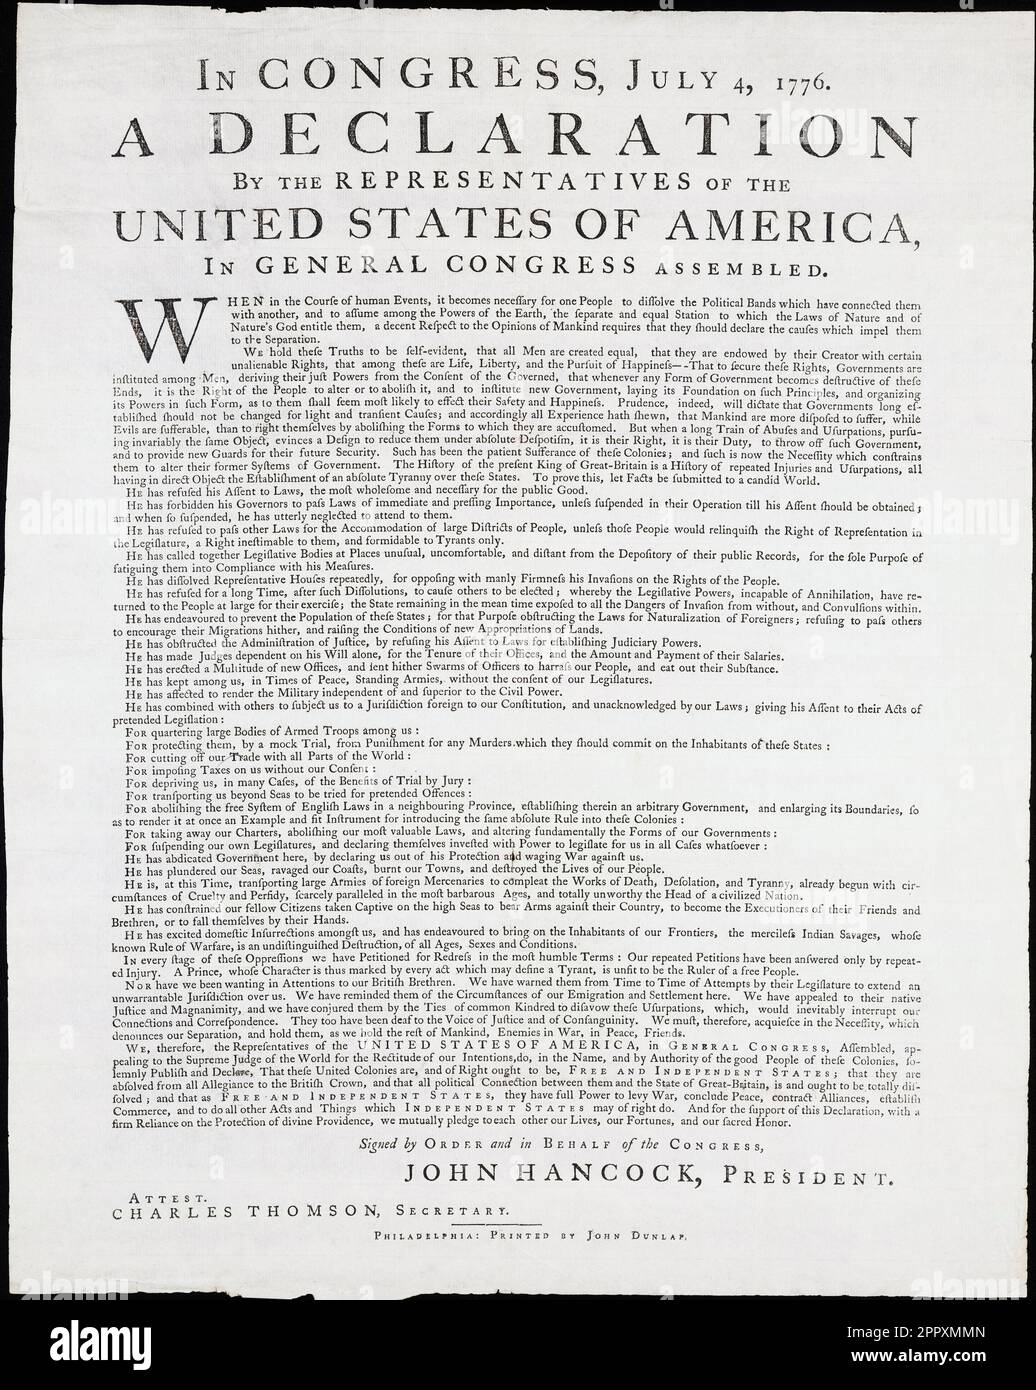 The United States Declaration of Independence.  This is a reproduction of a copy which was produced in unknown numbers and known as the Dunlap Broadside.  It is named after the printer, Irish immigrant John Dunlap, who typeset and printed the Declaration the same night it was presented to the Second Continental Congress, July 4, 1776. Stock Photo